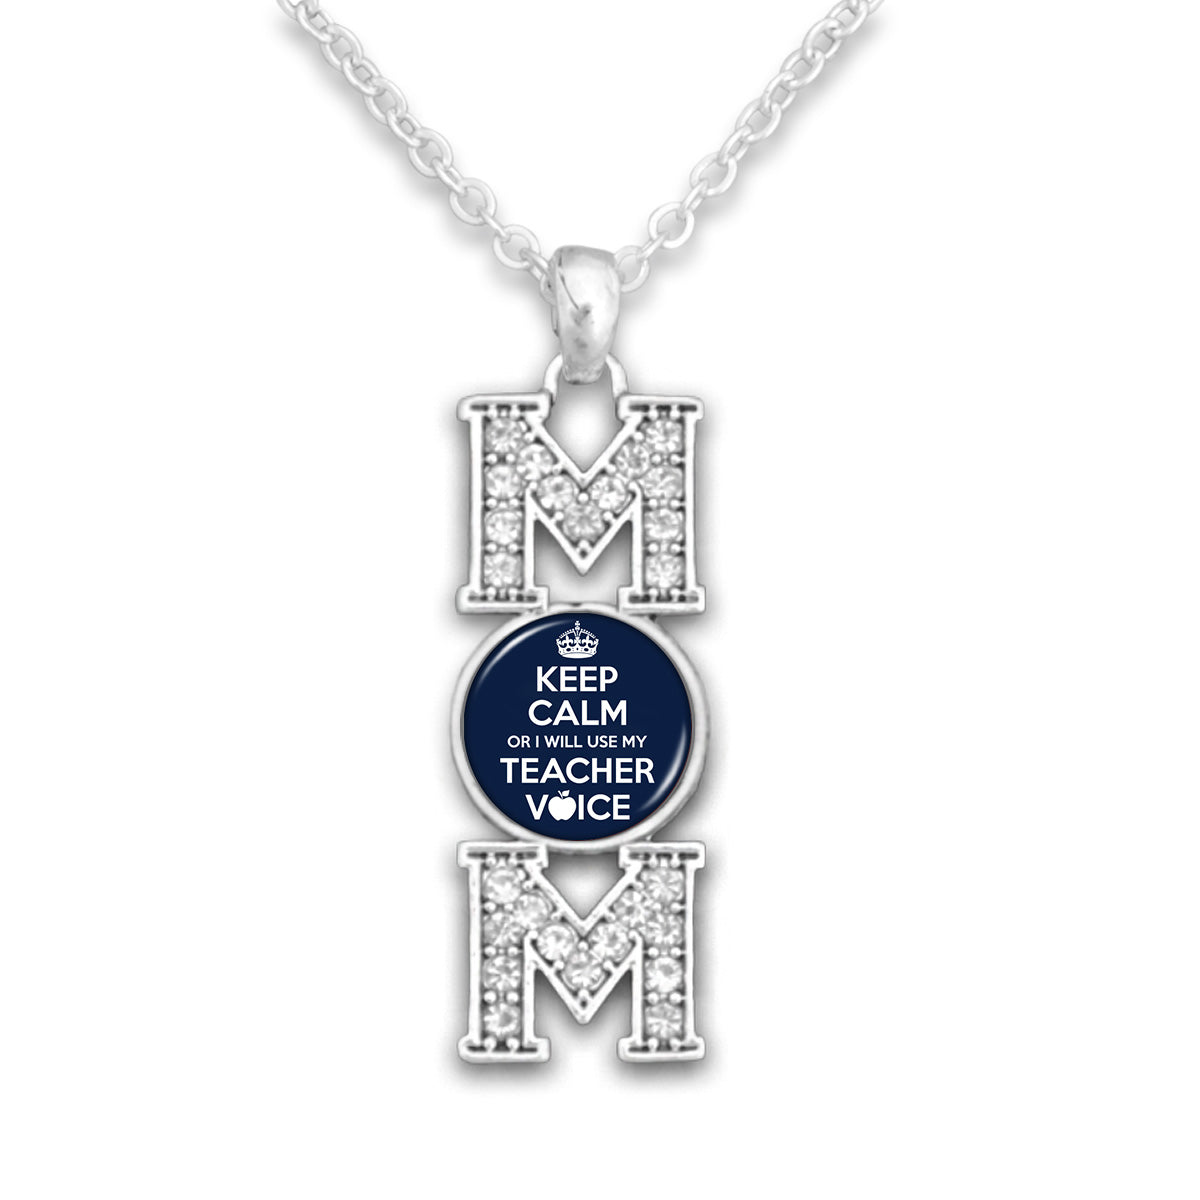 "Keep Calm Or I Will Use My Teacher Voice" Mom's Pendant Necklace